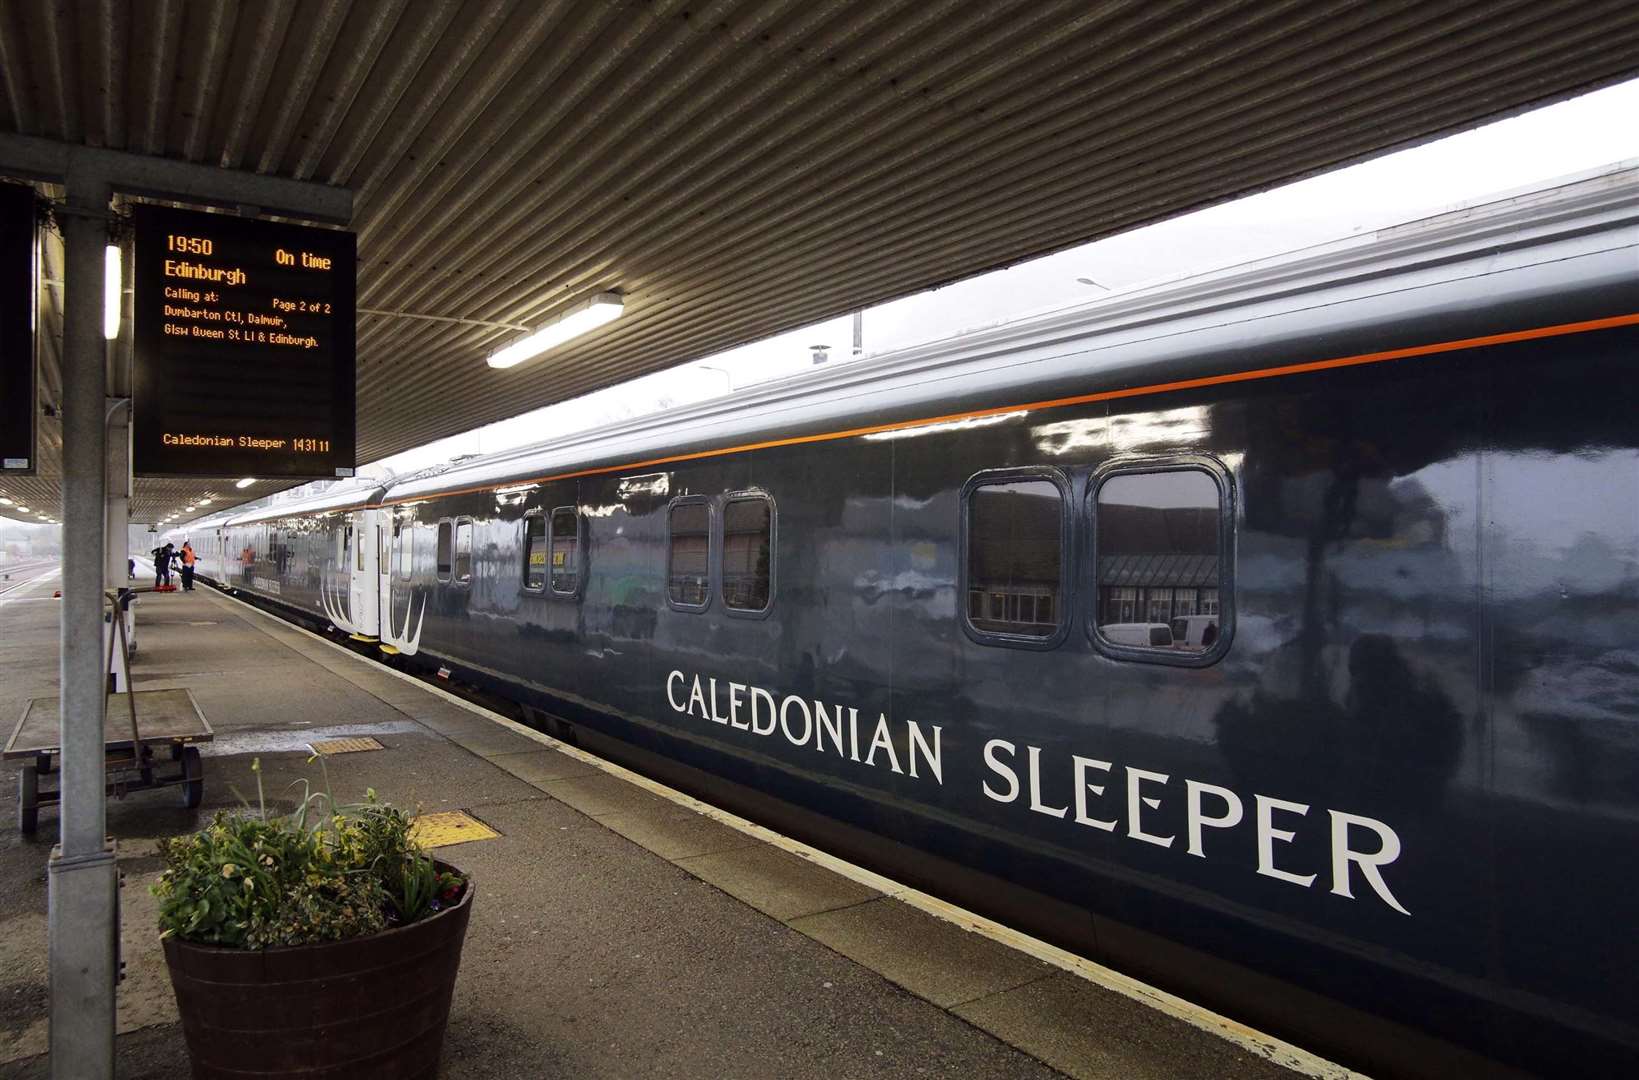 Calls have been made for the cross-border Caledonian Sleeper, which serves Inverness and other Scottish cities, to be publicly-owned.